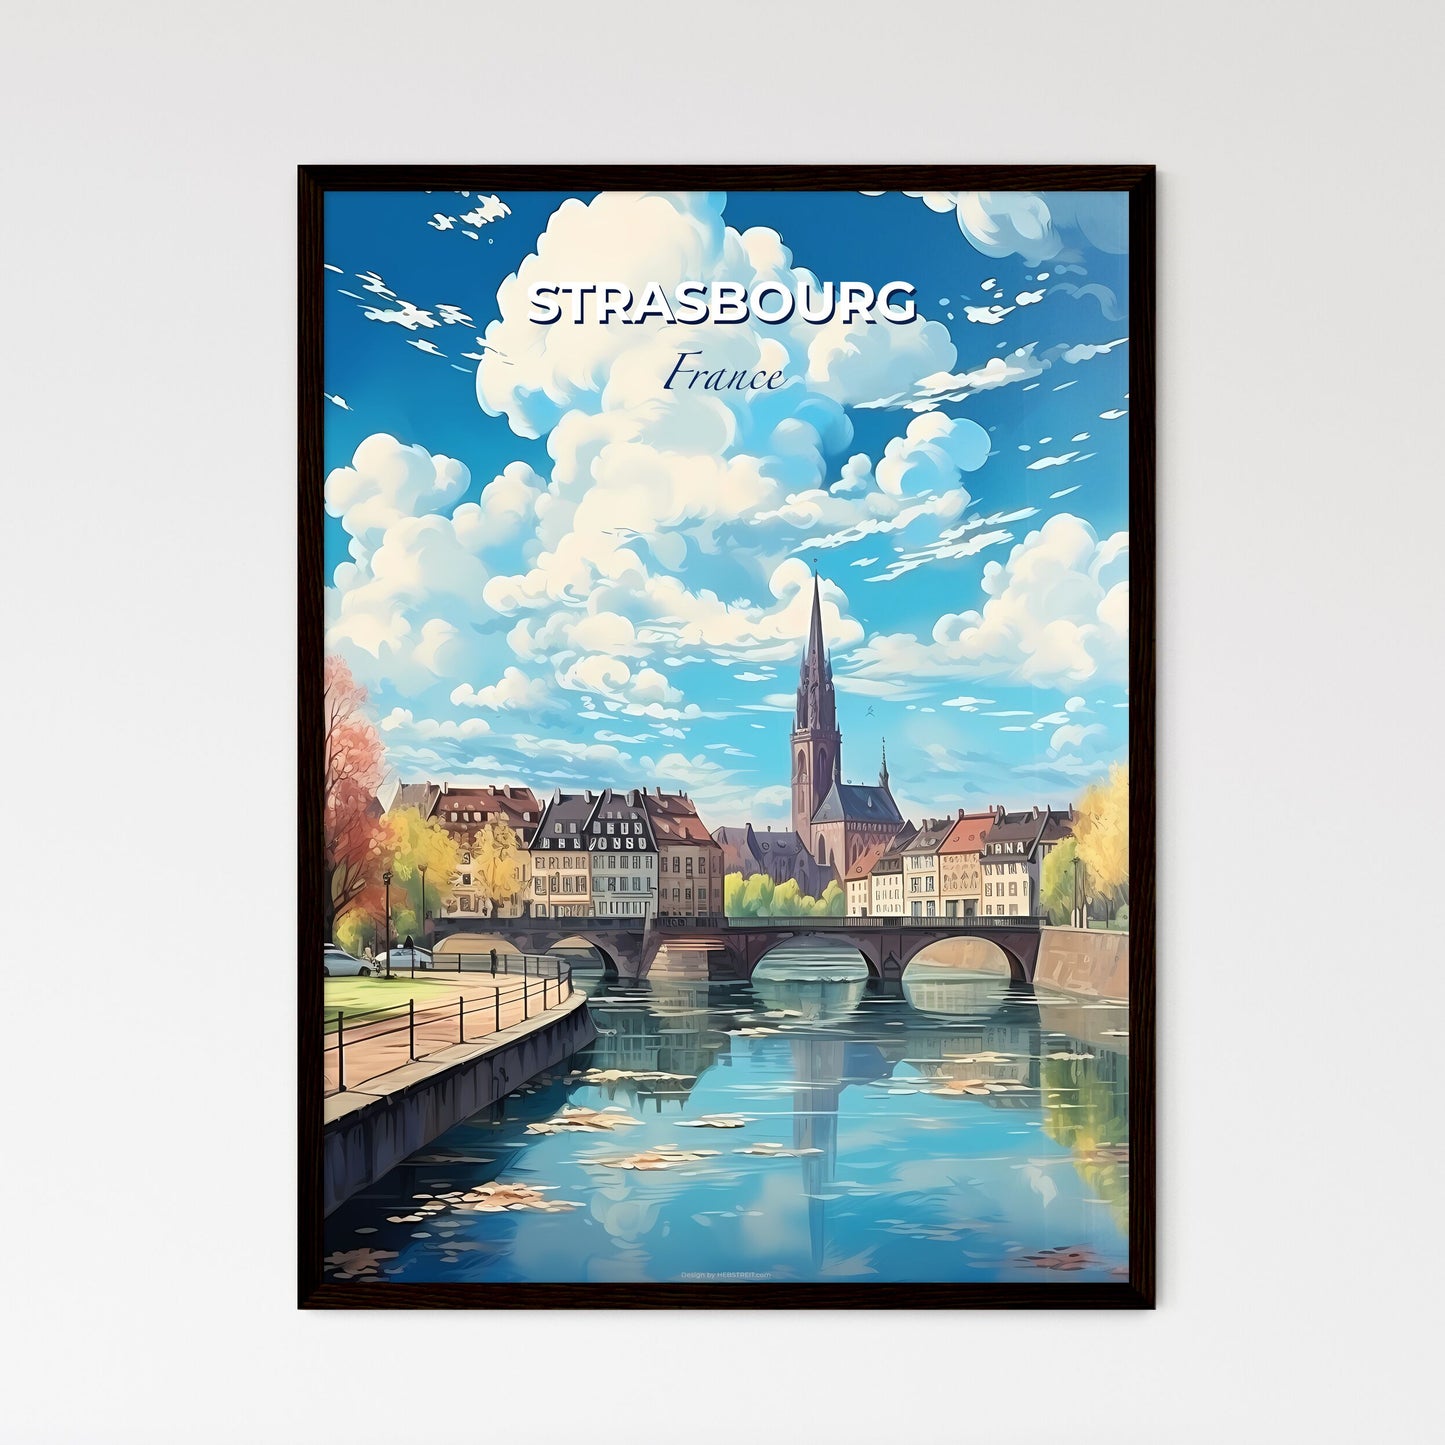 Strasbourg France Skyline - A River With A Bridge And Buildings In The Background - Customizable Travel Gift Default Title